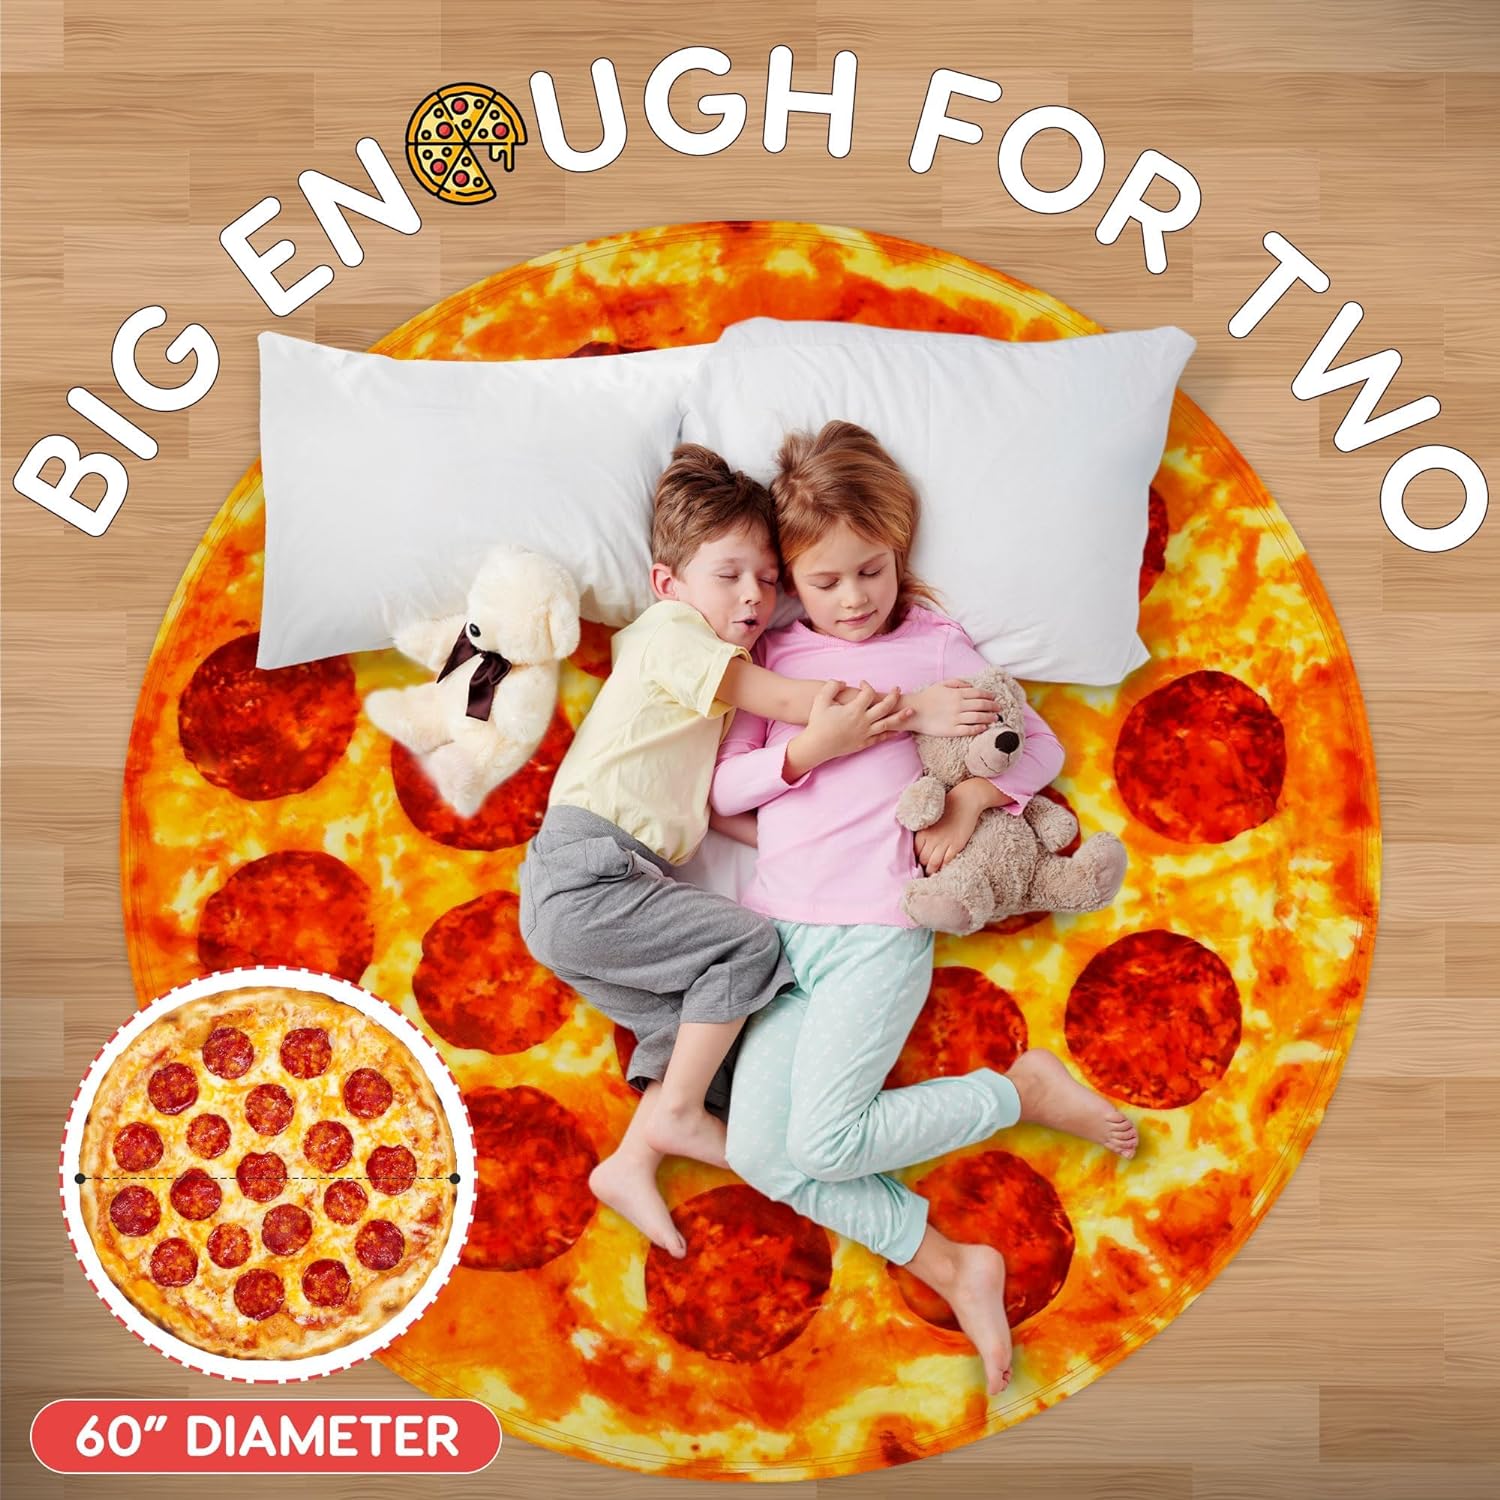 SDJMa 60 inch Pizza Blanket for Adult Kid, Food Blanket Pizza for